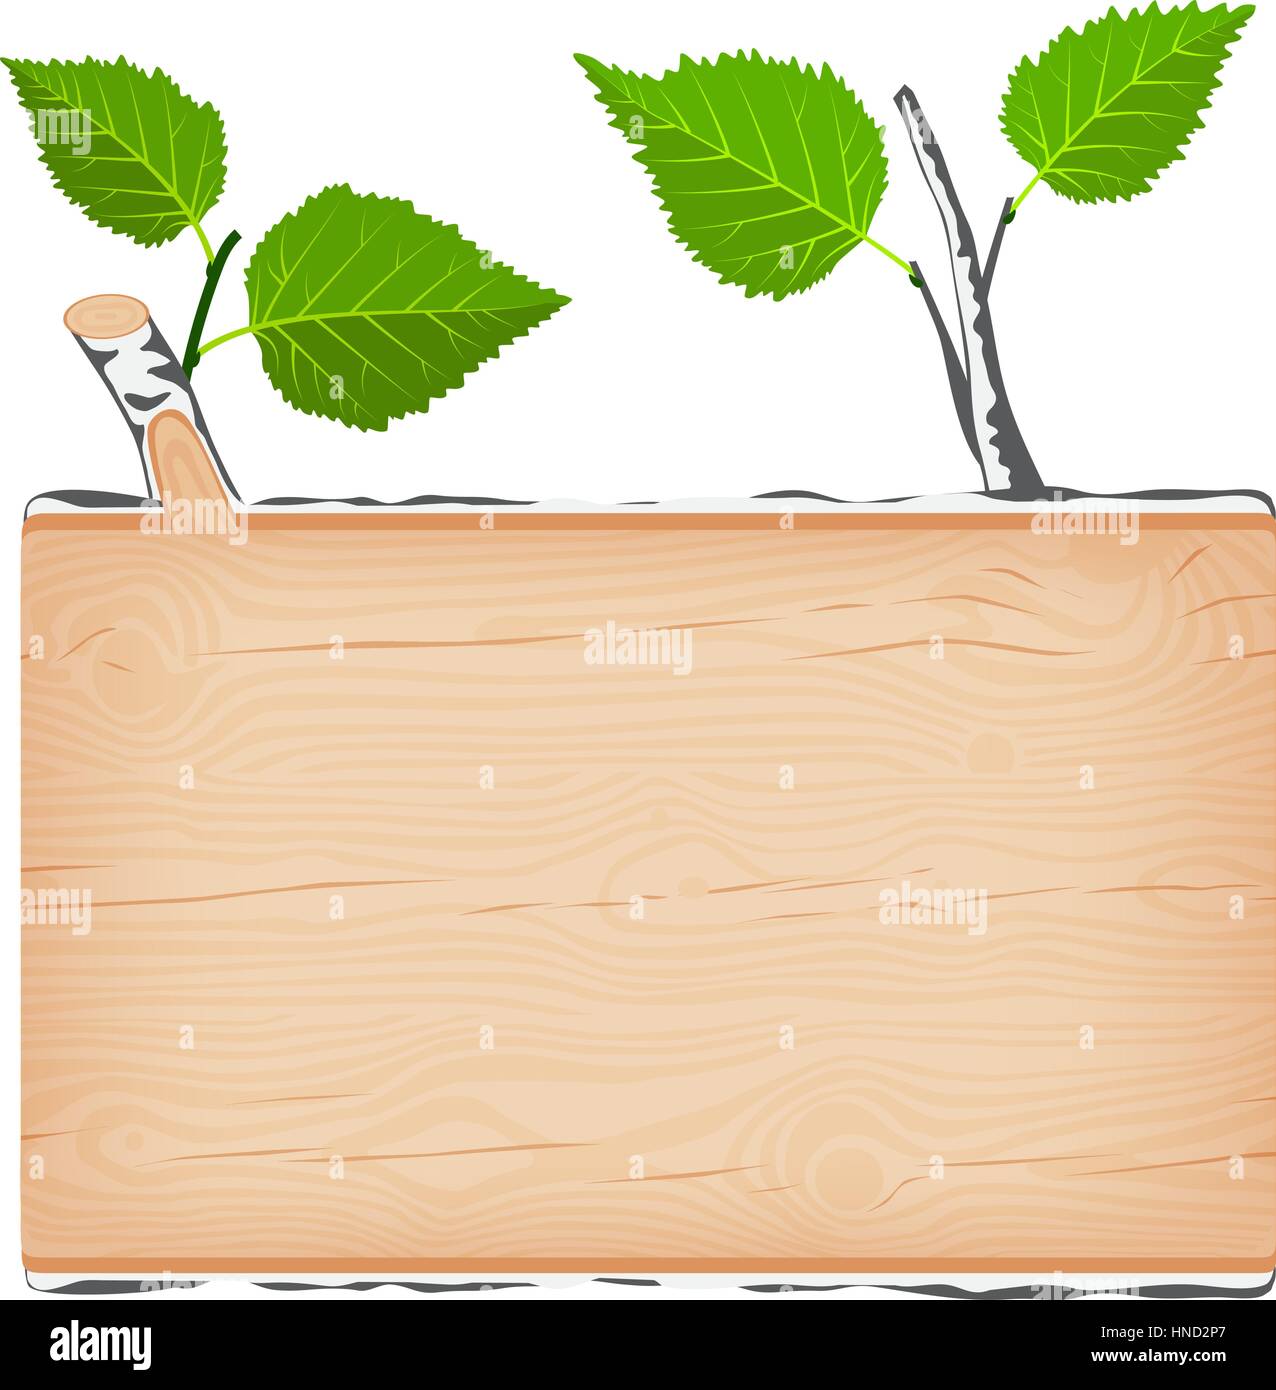 Natural textured birch wooden rectangular signboard with green leaves vector illustration Stock Vector